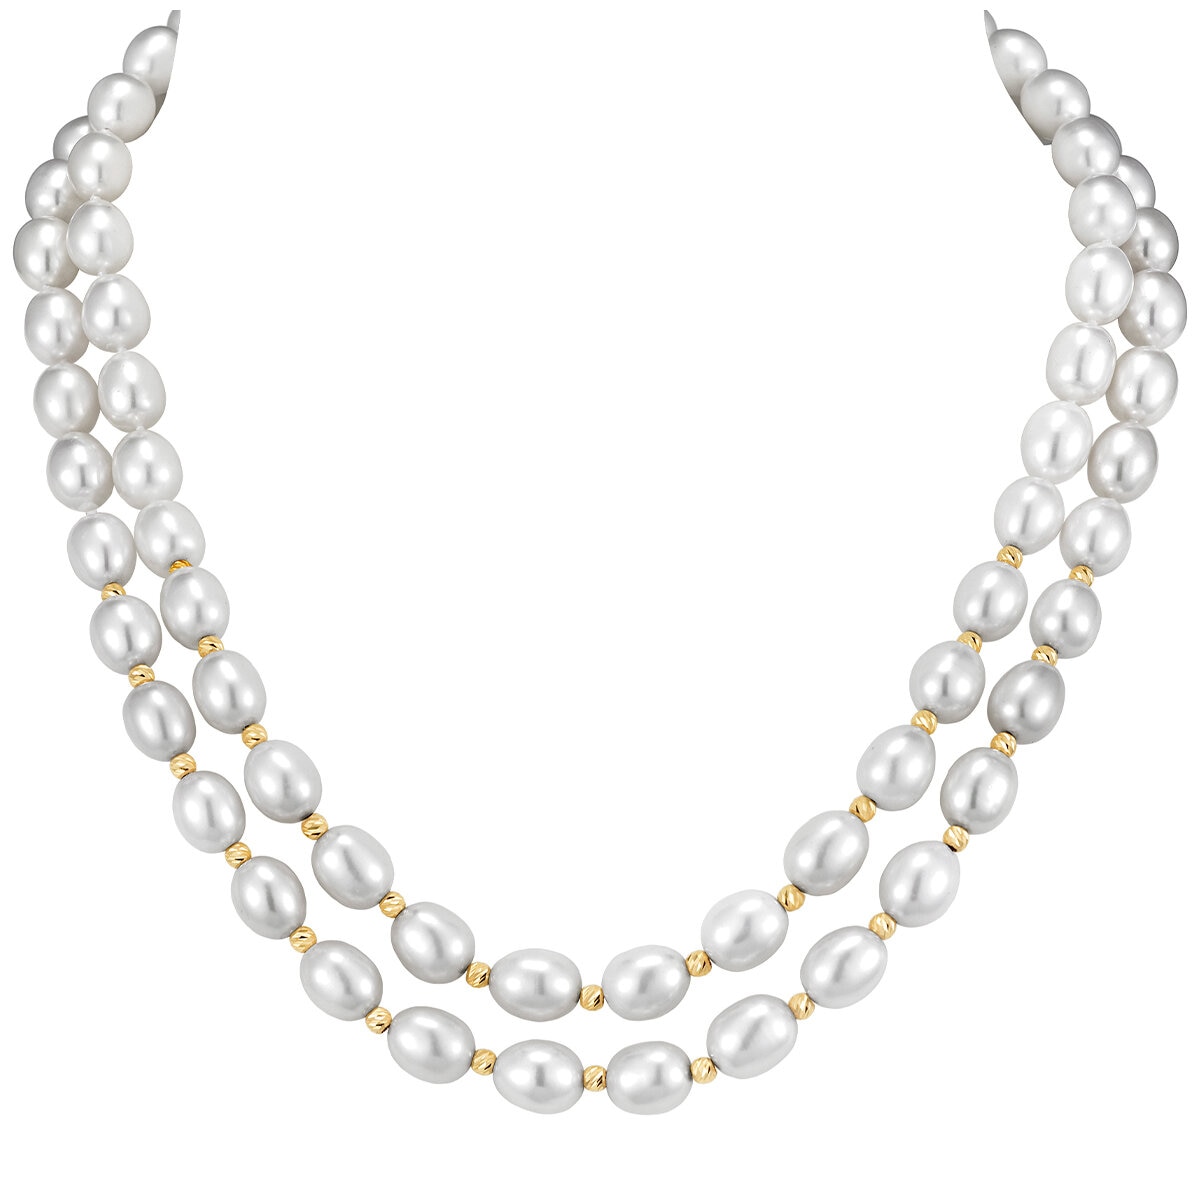 14KT Yellow Gold Two-Row 8-9mm Oval Freshwater Pearl Diamond Cut Bead Necklace